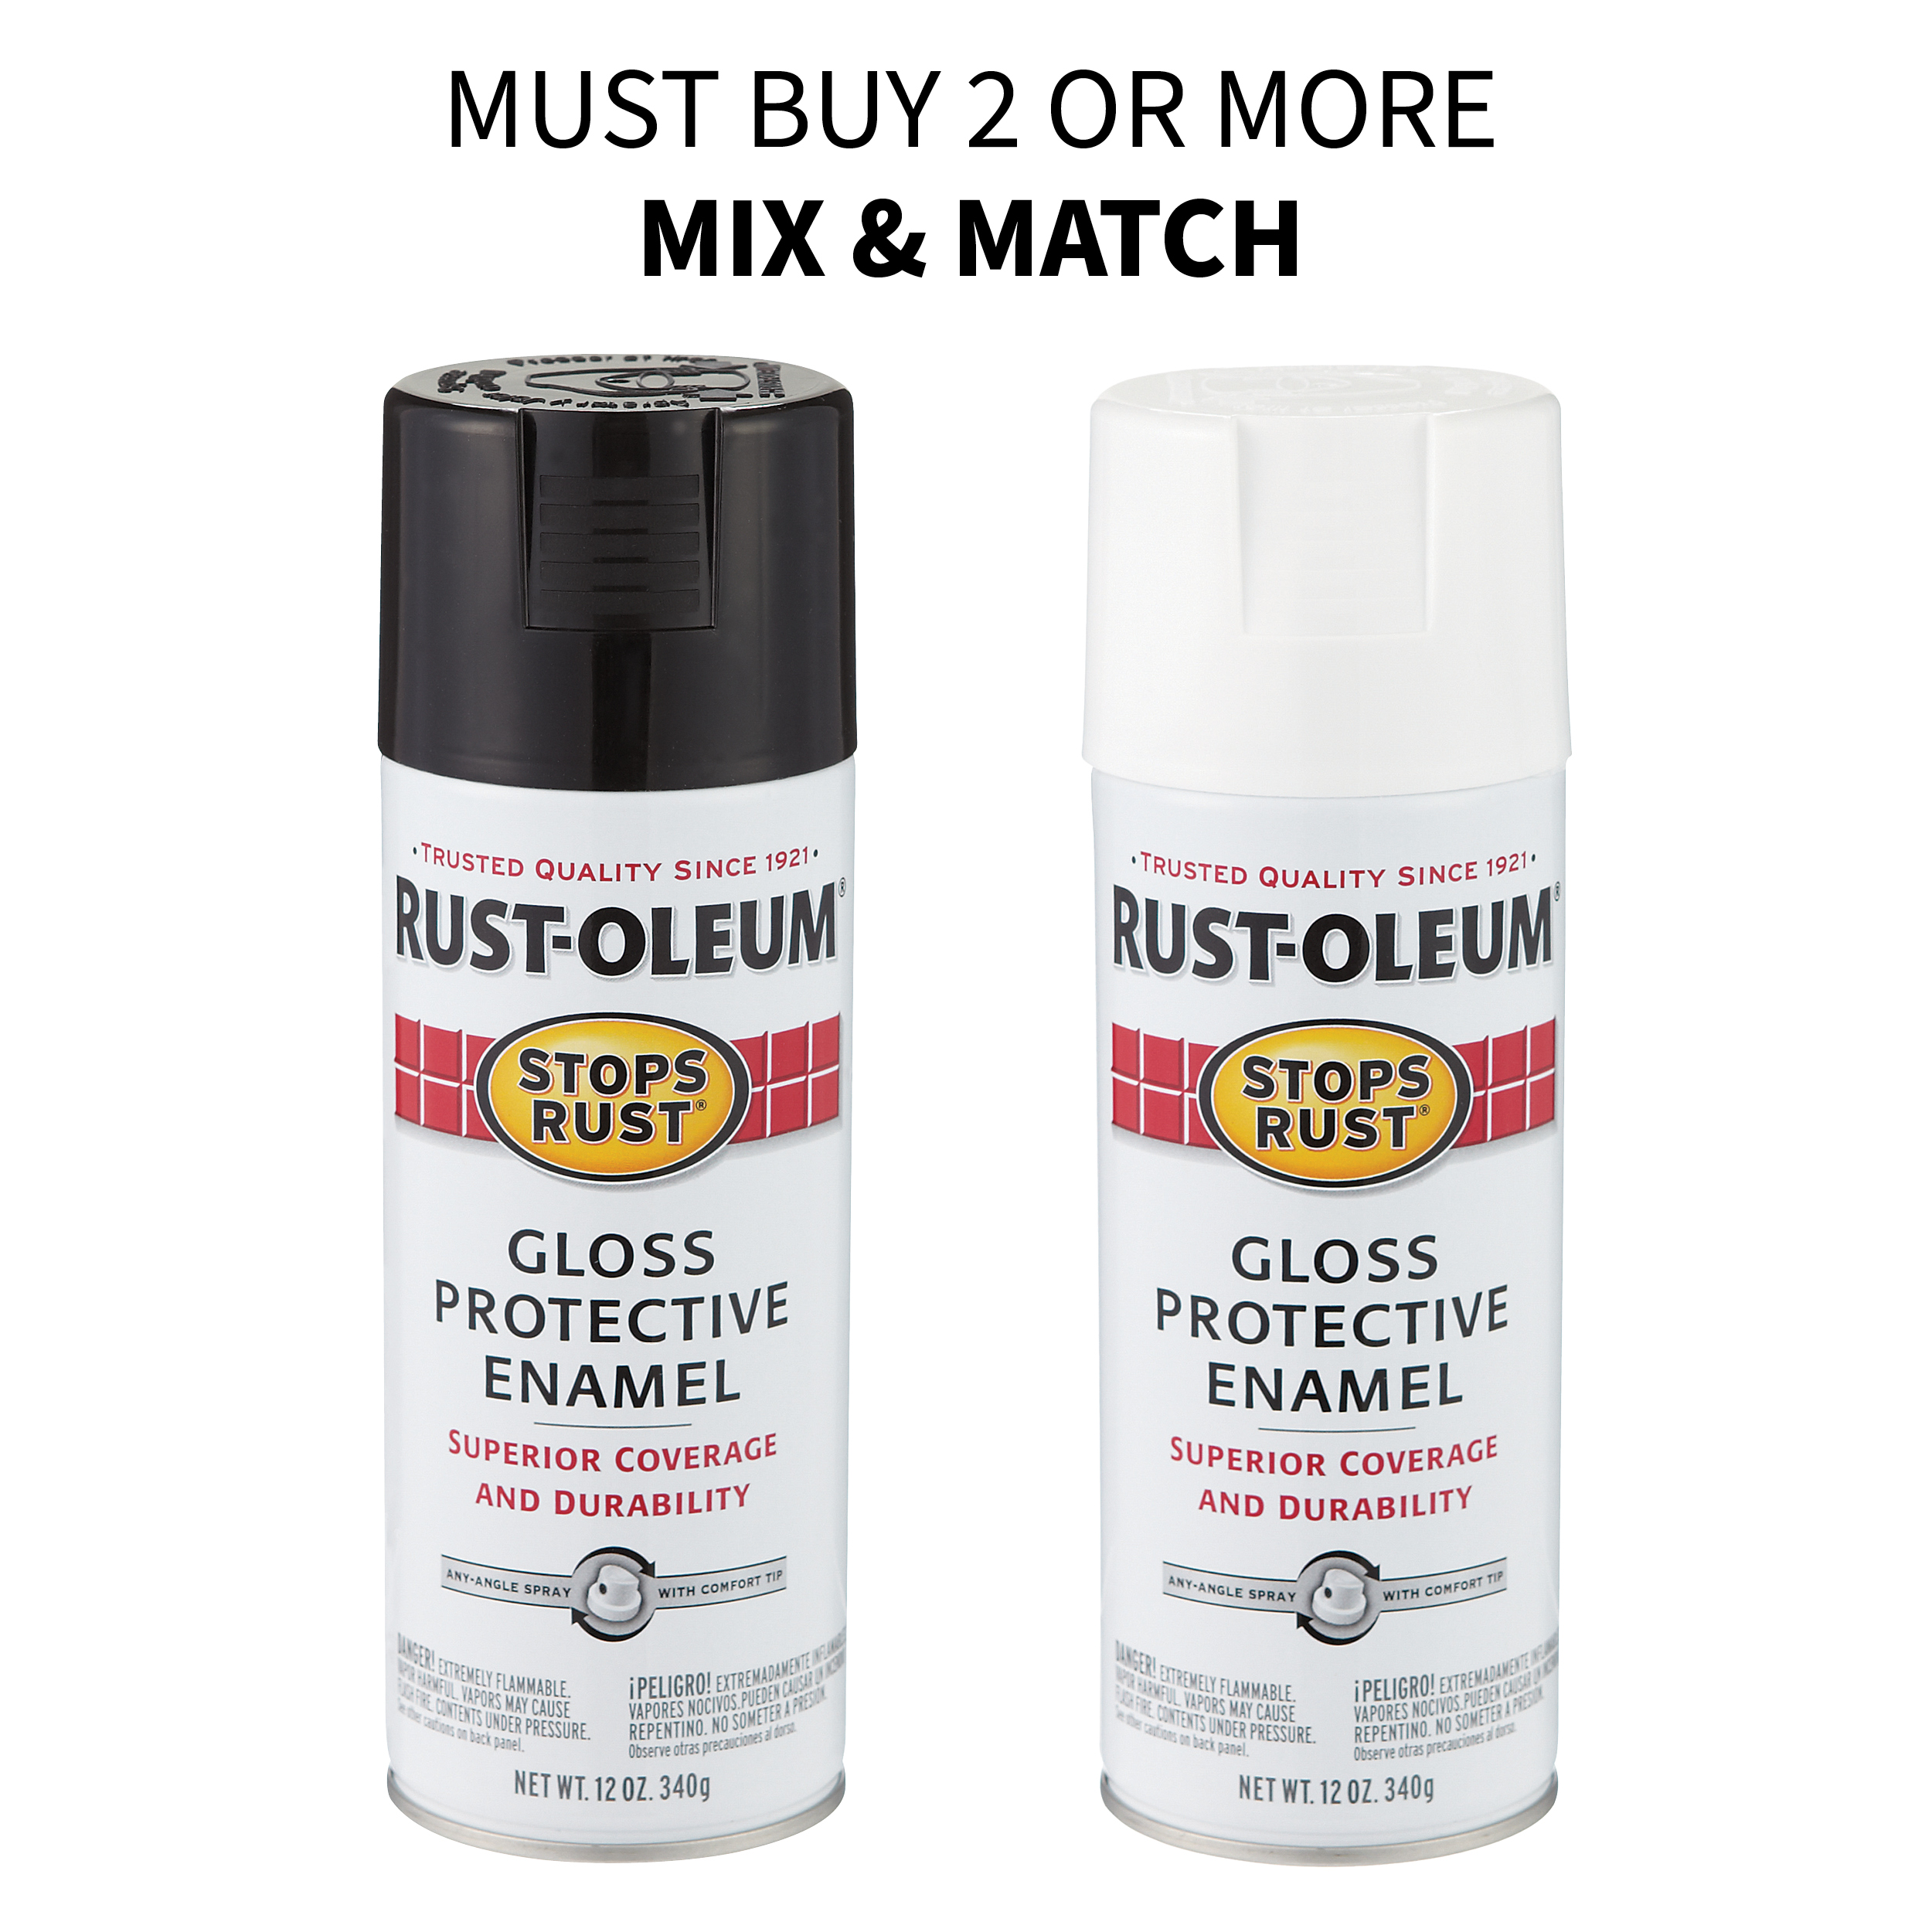 Mix & match Rust-Oleum Protective Enamel Spray. Must buy 2 or more.